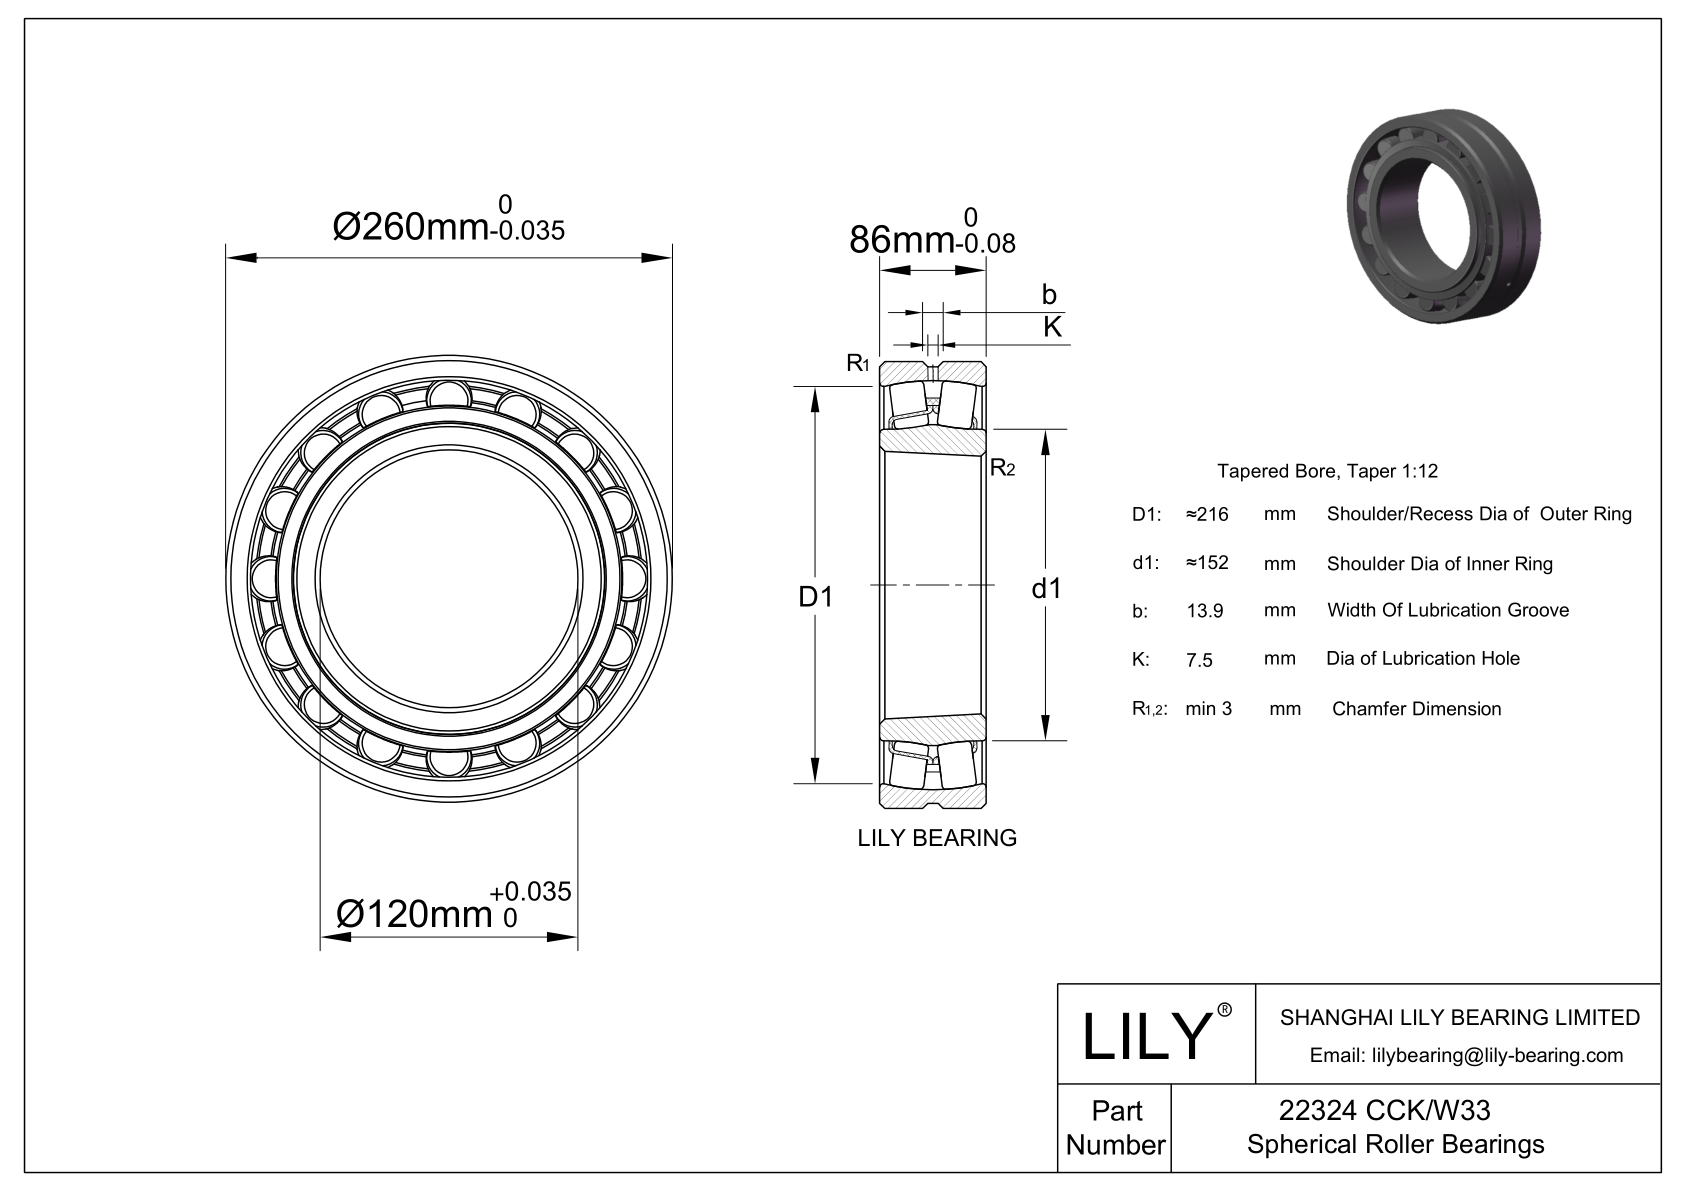 22324 CCK/W33 Double Row Spherical Roller Bearing cad drawing